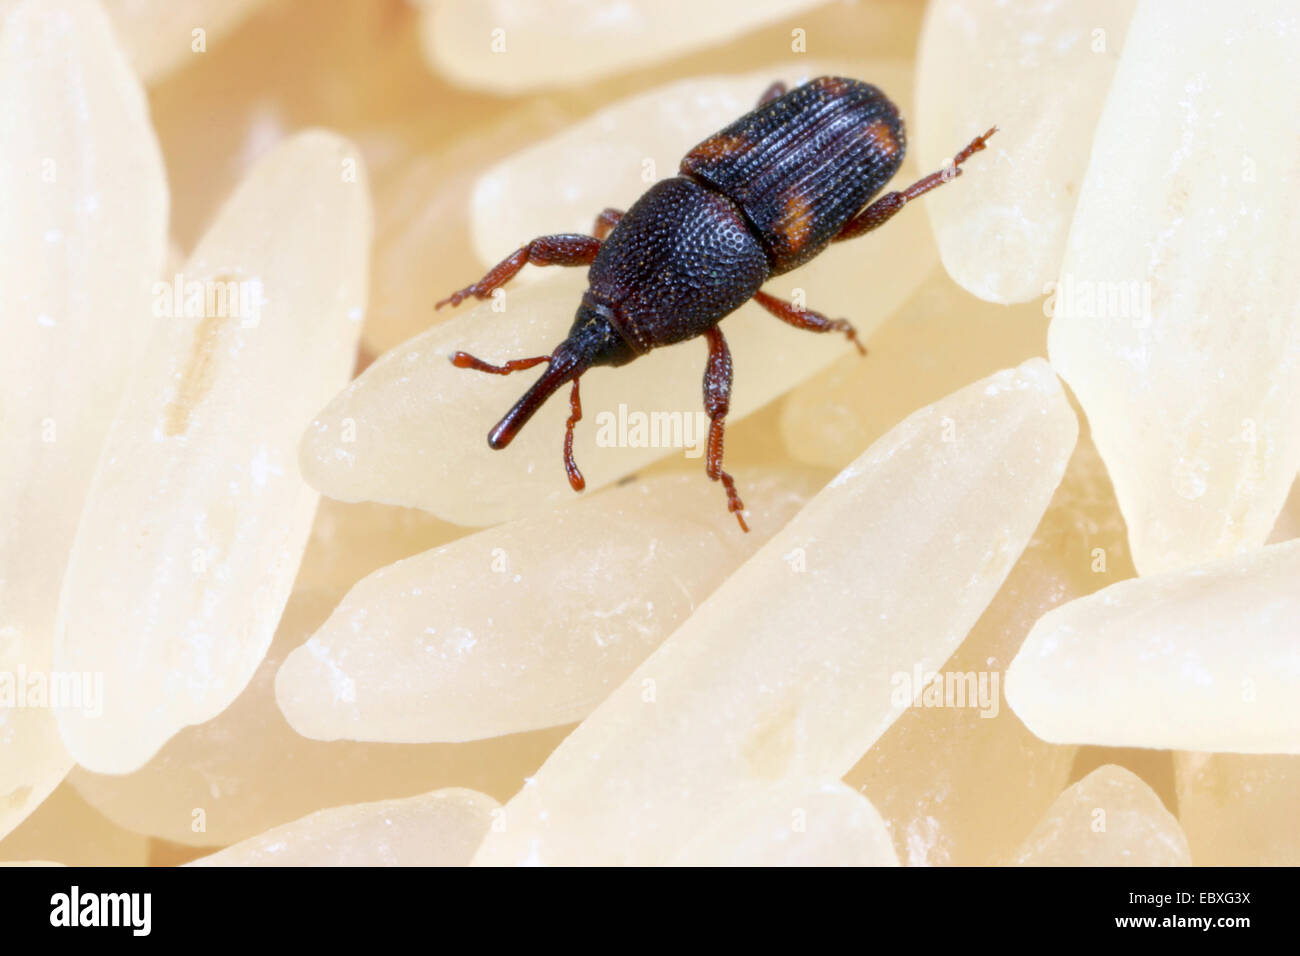 rice weevil (Sitophilus oryzae), on rice grains, Germany Stock Photo